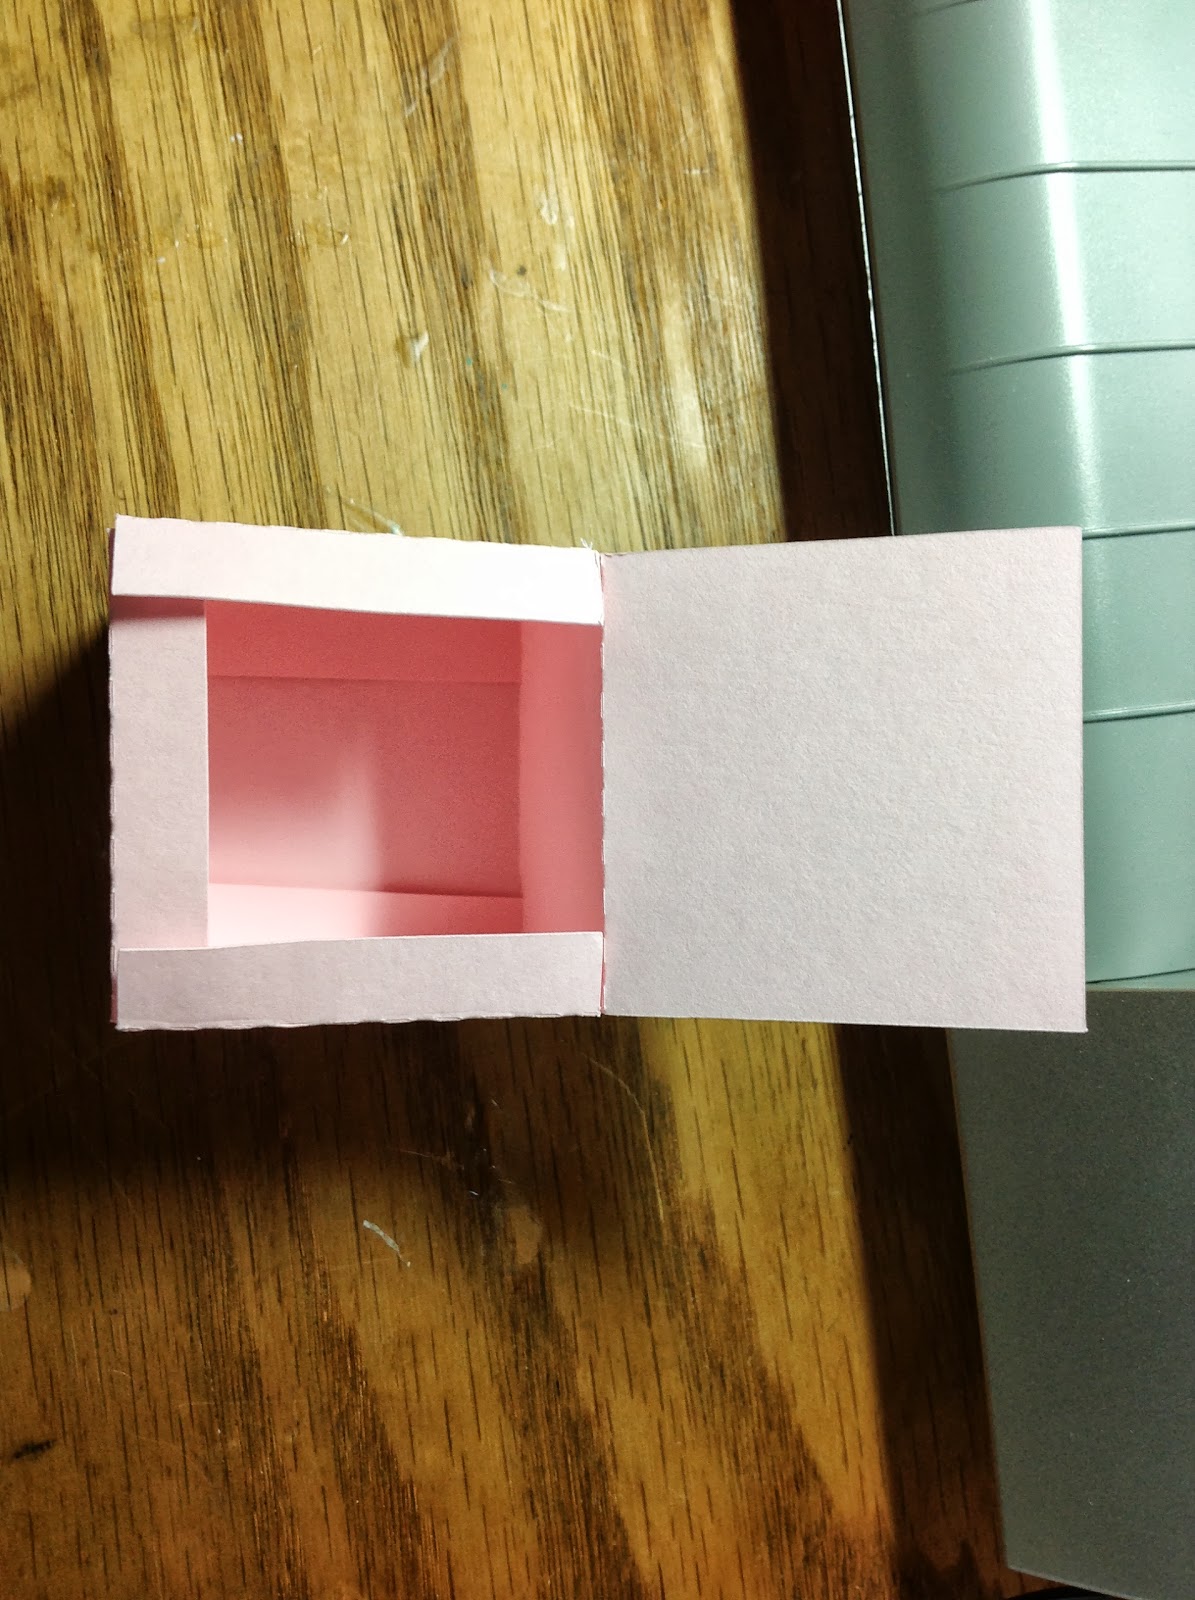 Papercrafts and other fun things: A Cube Making Cubes Toy